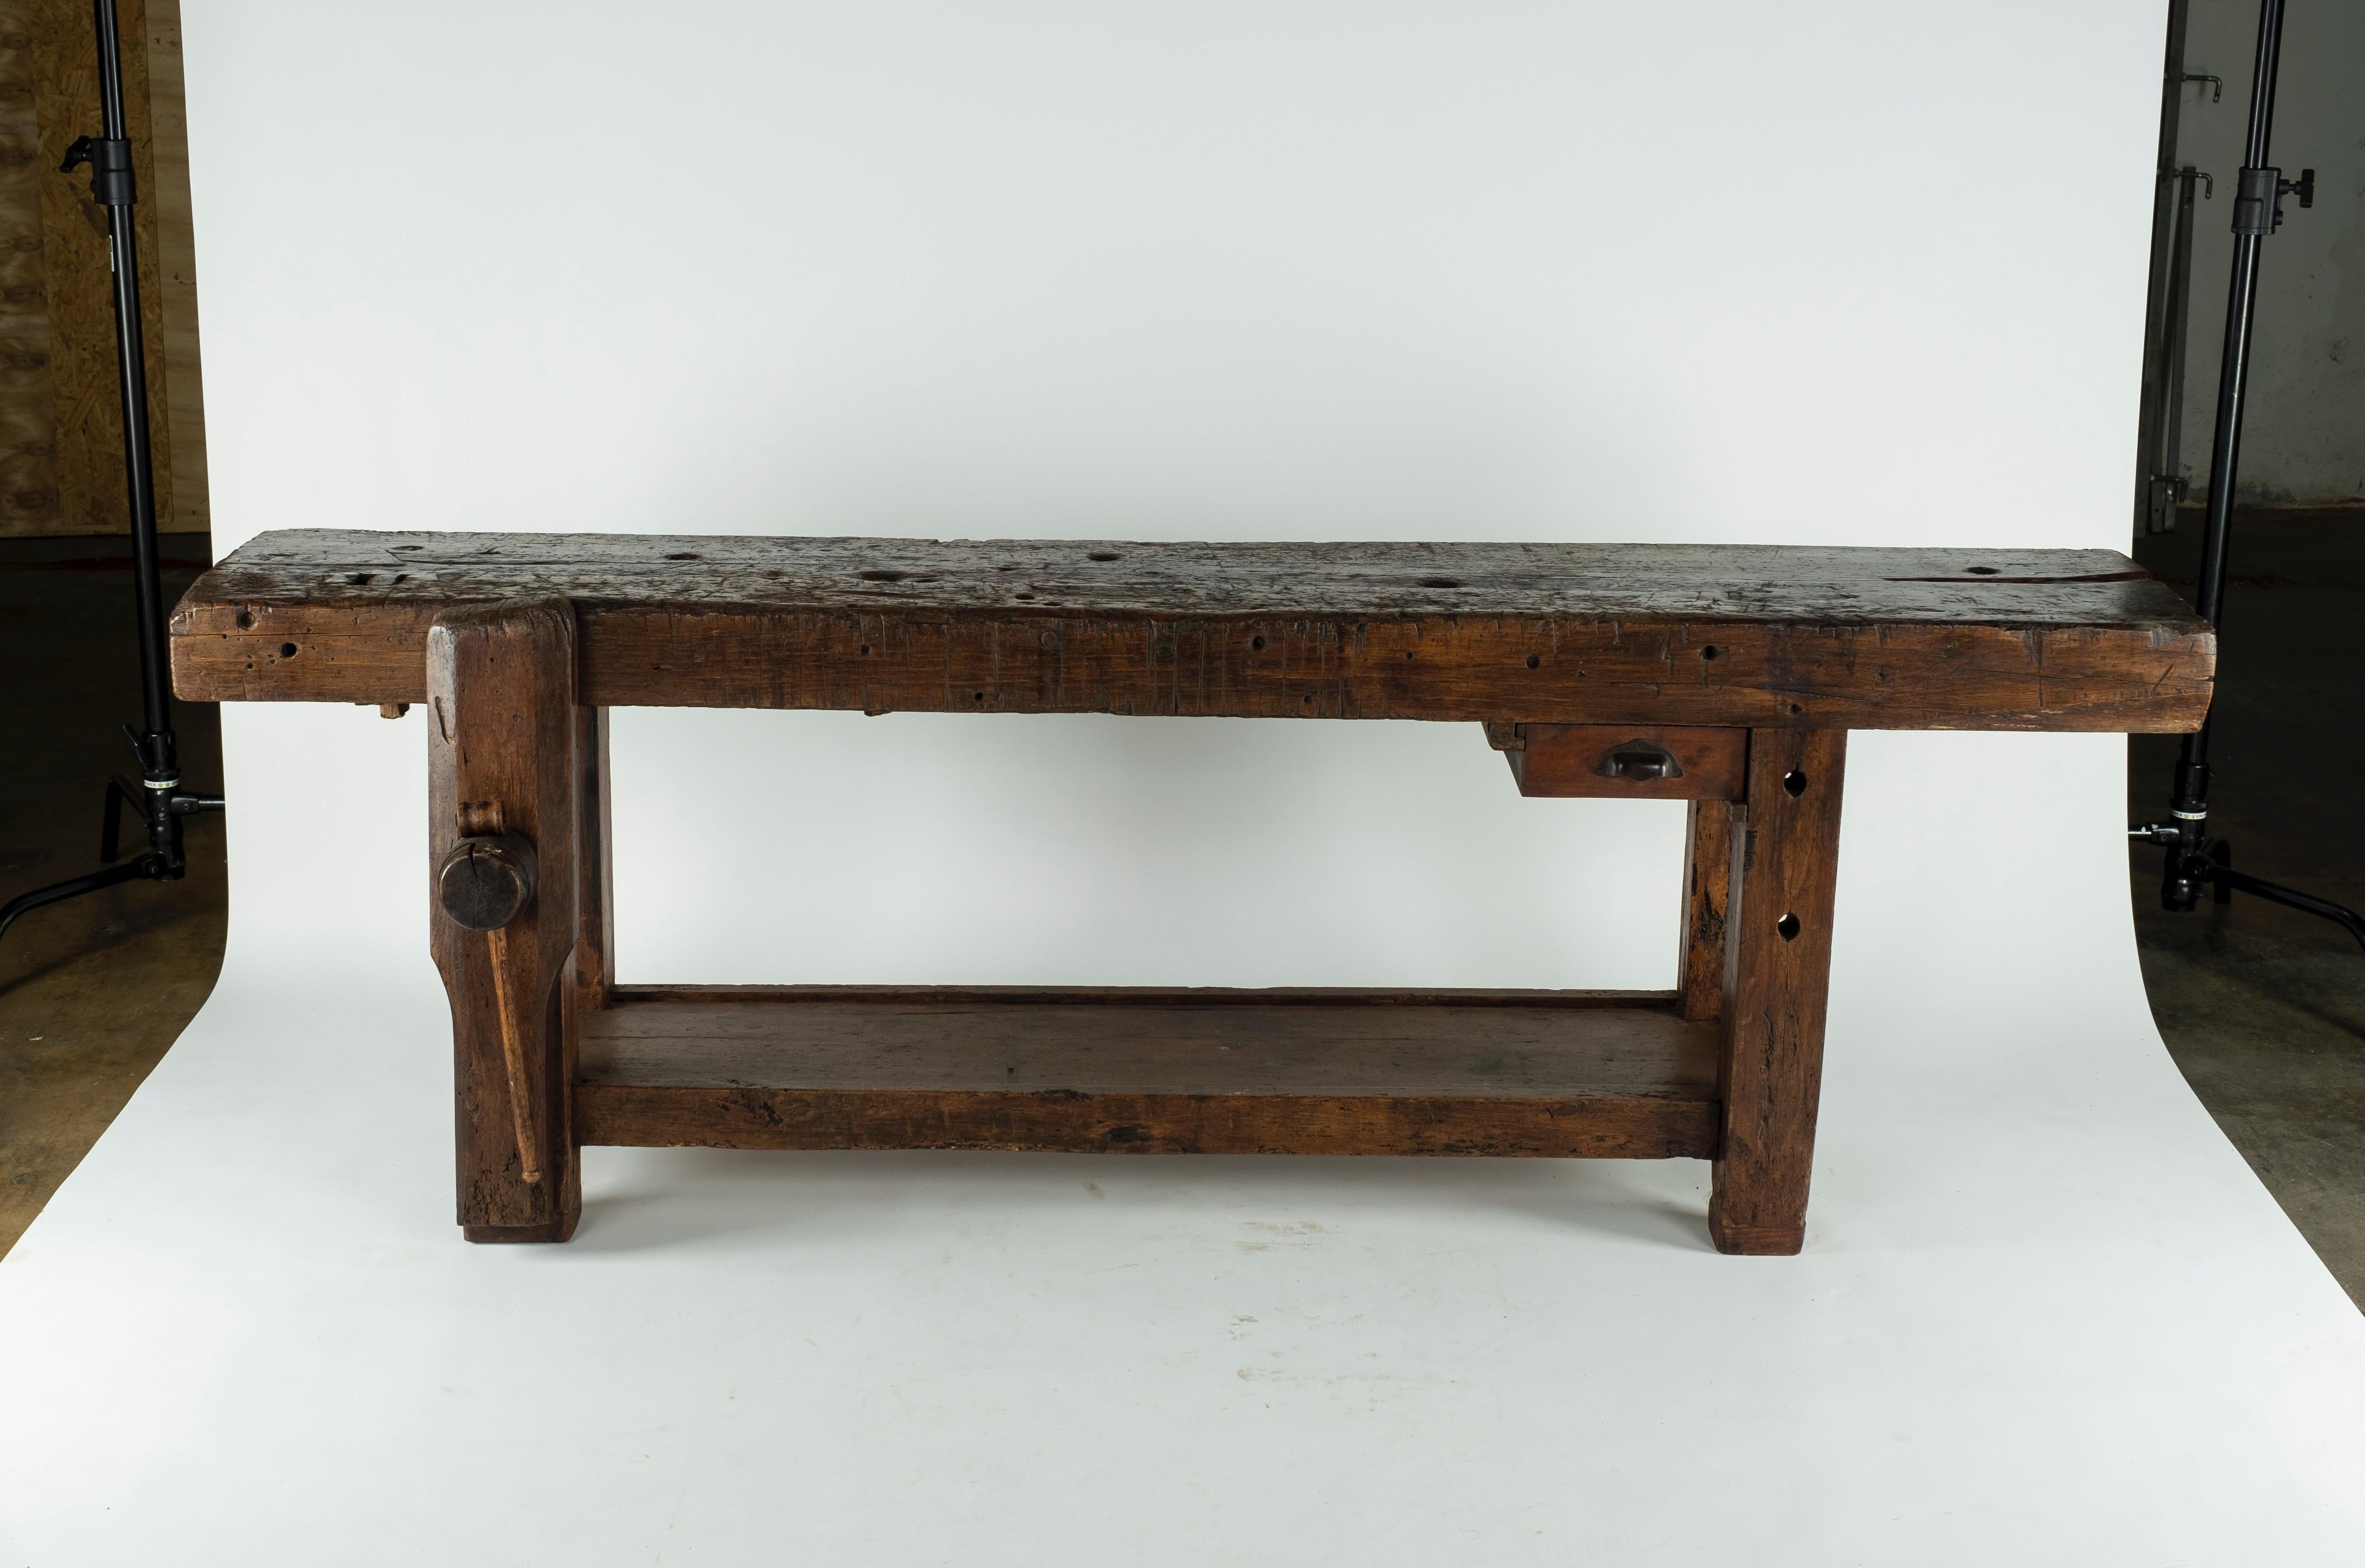 19th century chestnut workbench with original vise and a shelf underneath. The depth of the piece with the vise is 24